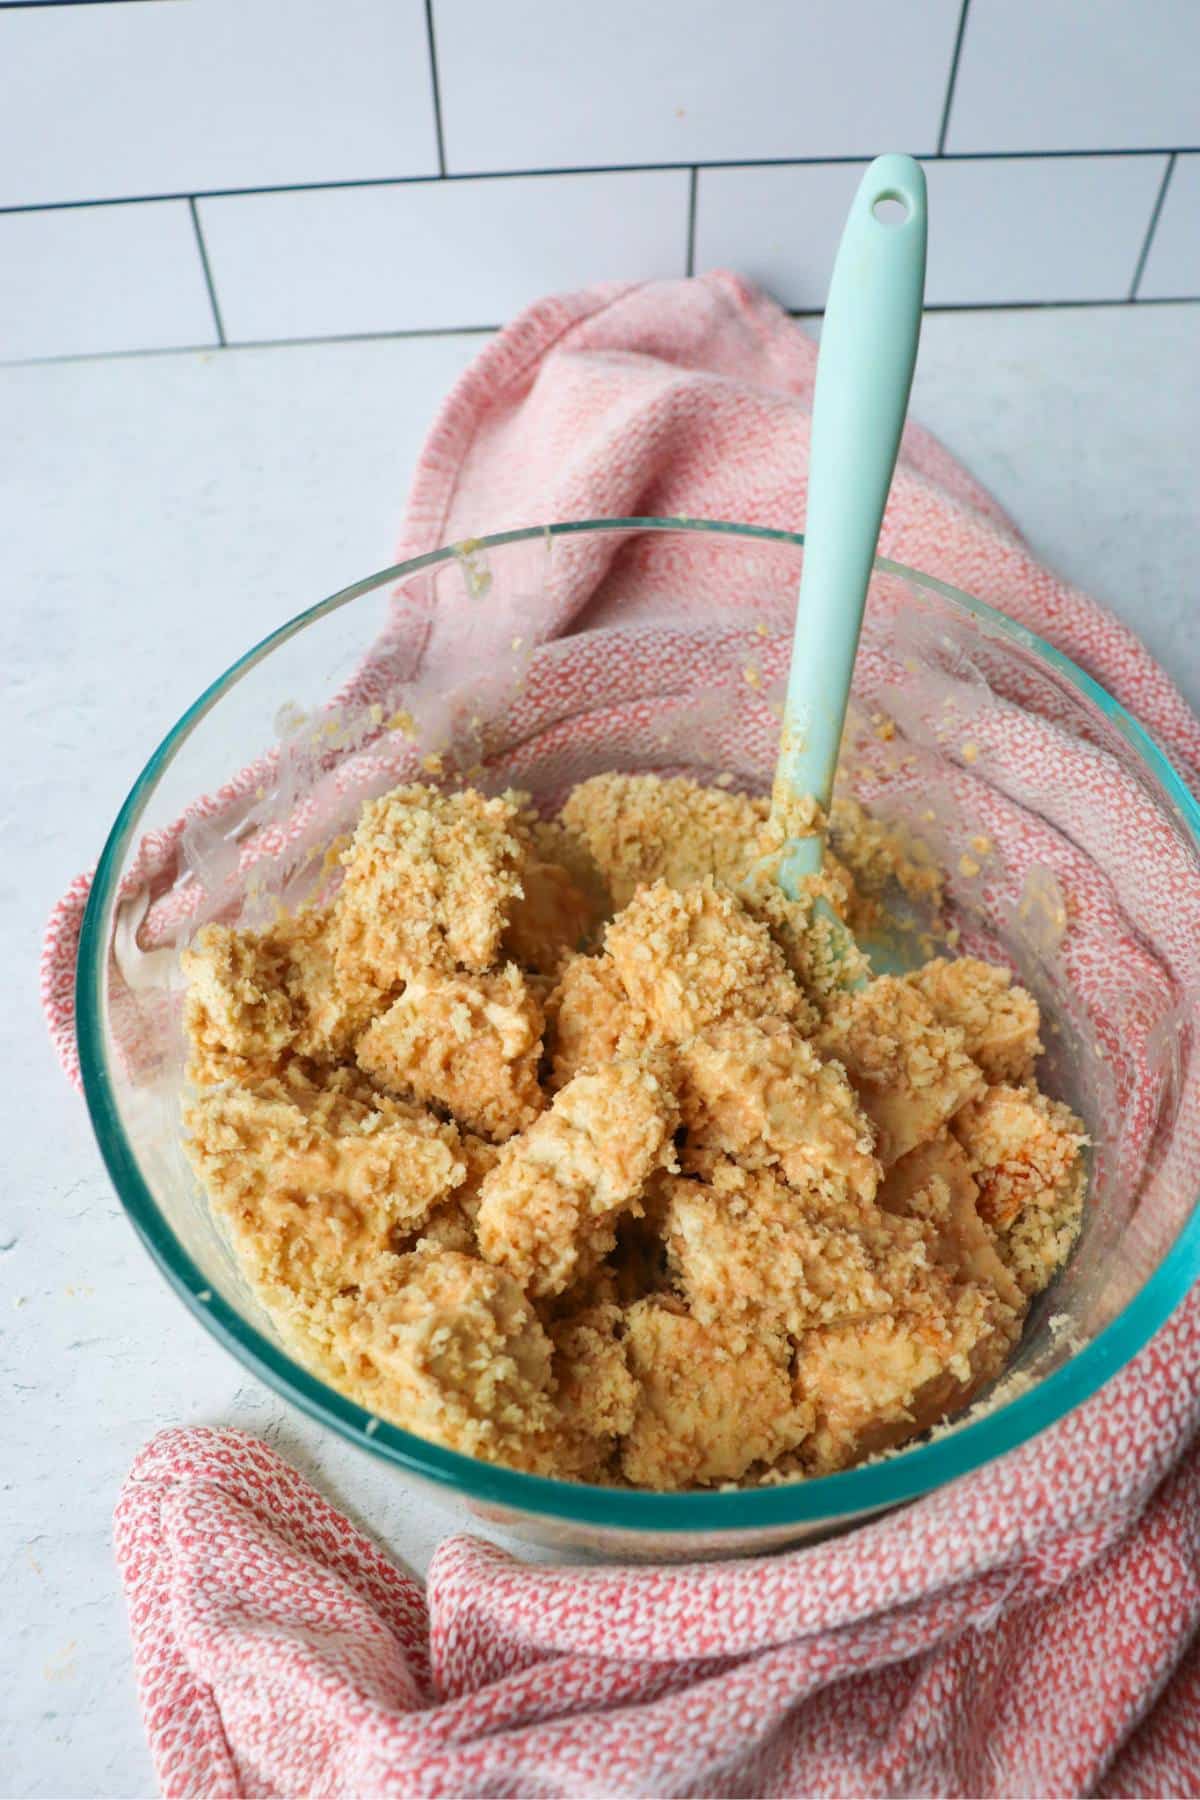 Tofu cubes in a bowl with bread crumbs.